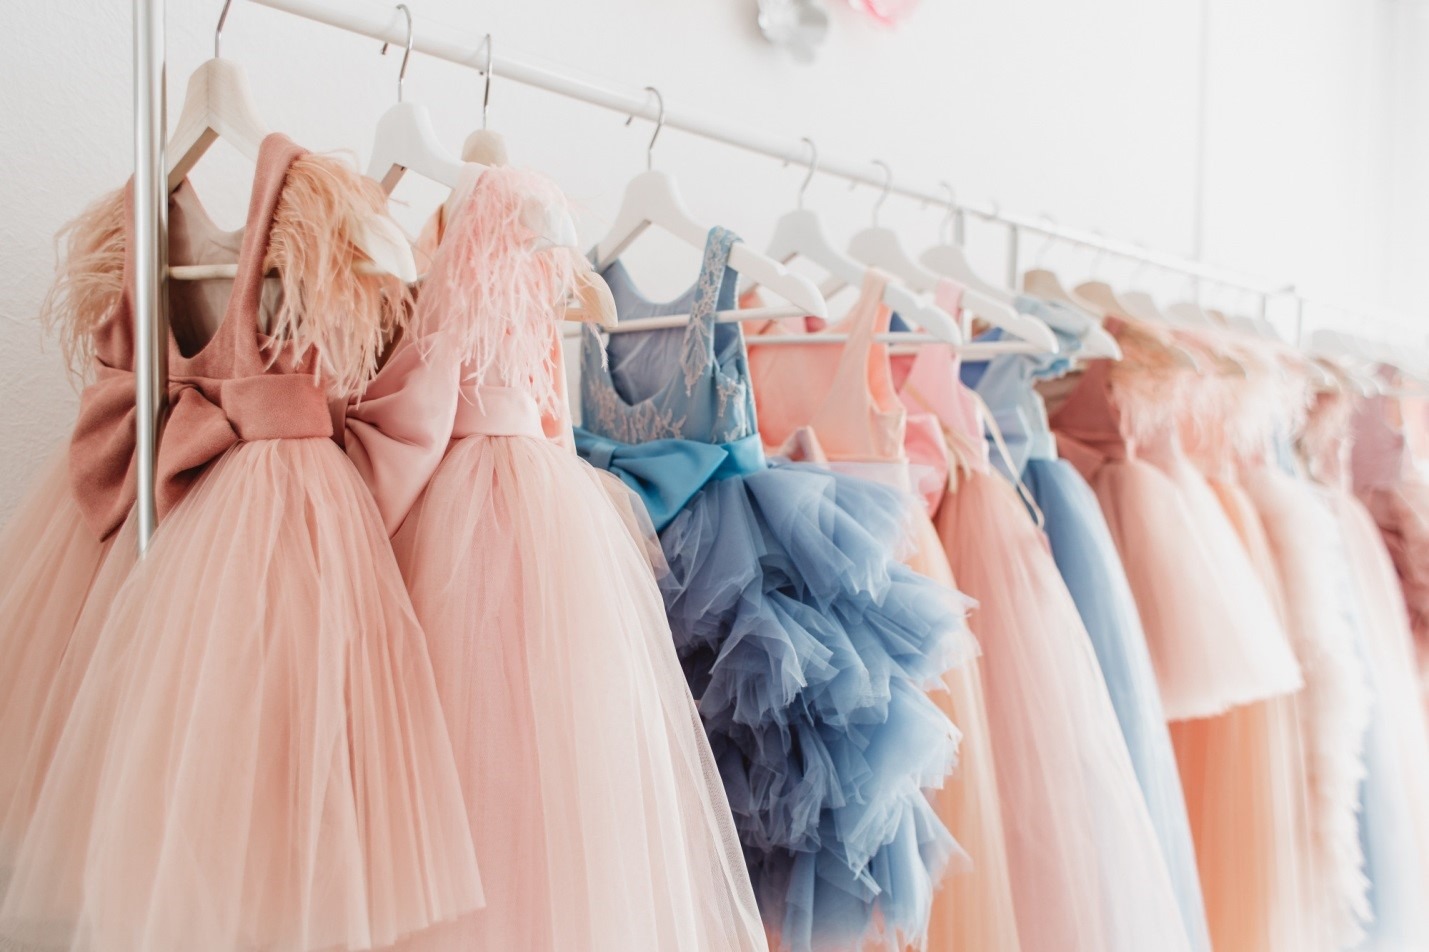 Prom Fashion 2021: Your Ultimate Guide To Finding The Perfect Prom DressDid You Know Fashion